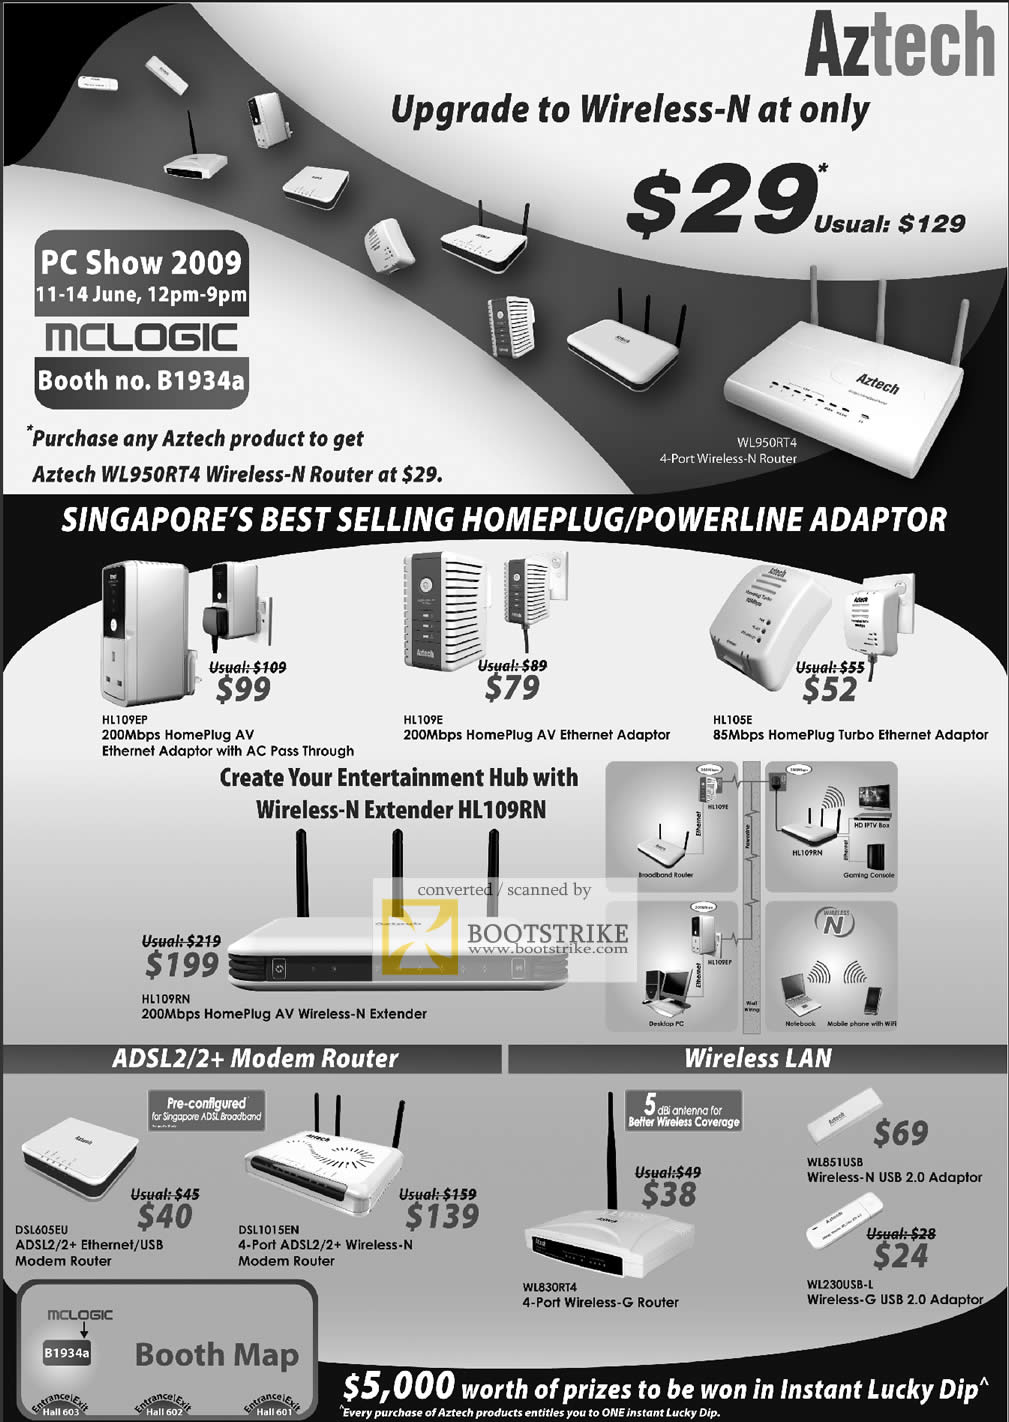 PC Show 2009 price list image brochure of Aztech HomePlug Ethernet Adapter Wireless N Extender Router ADSL